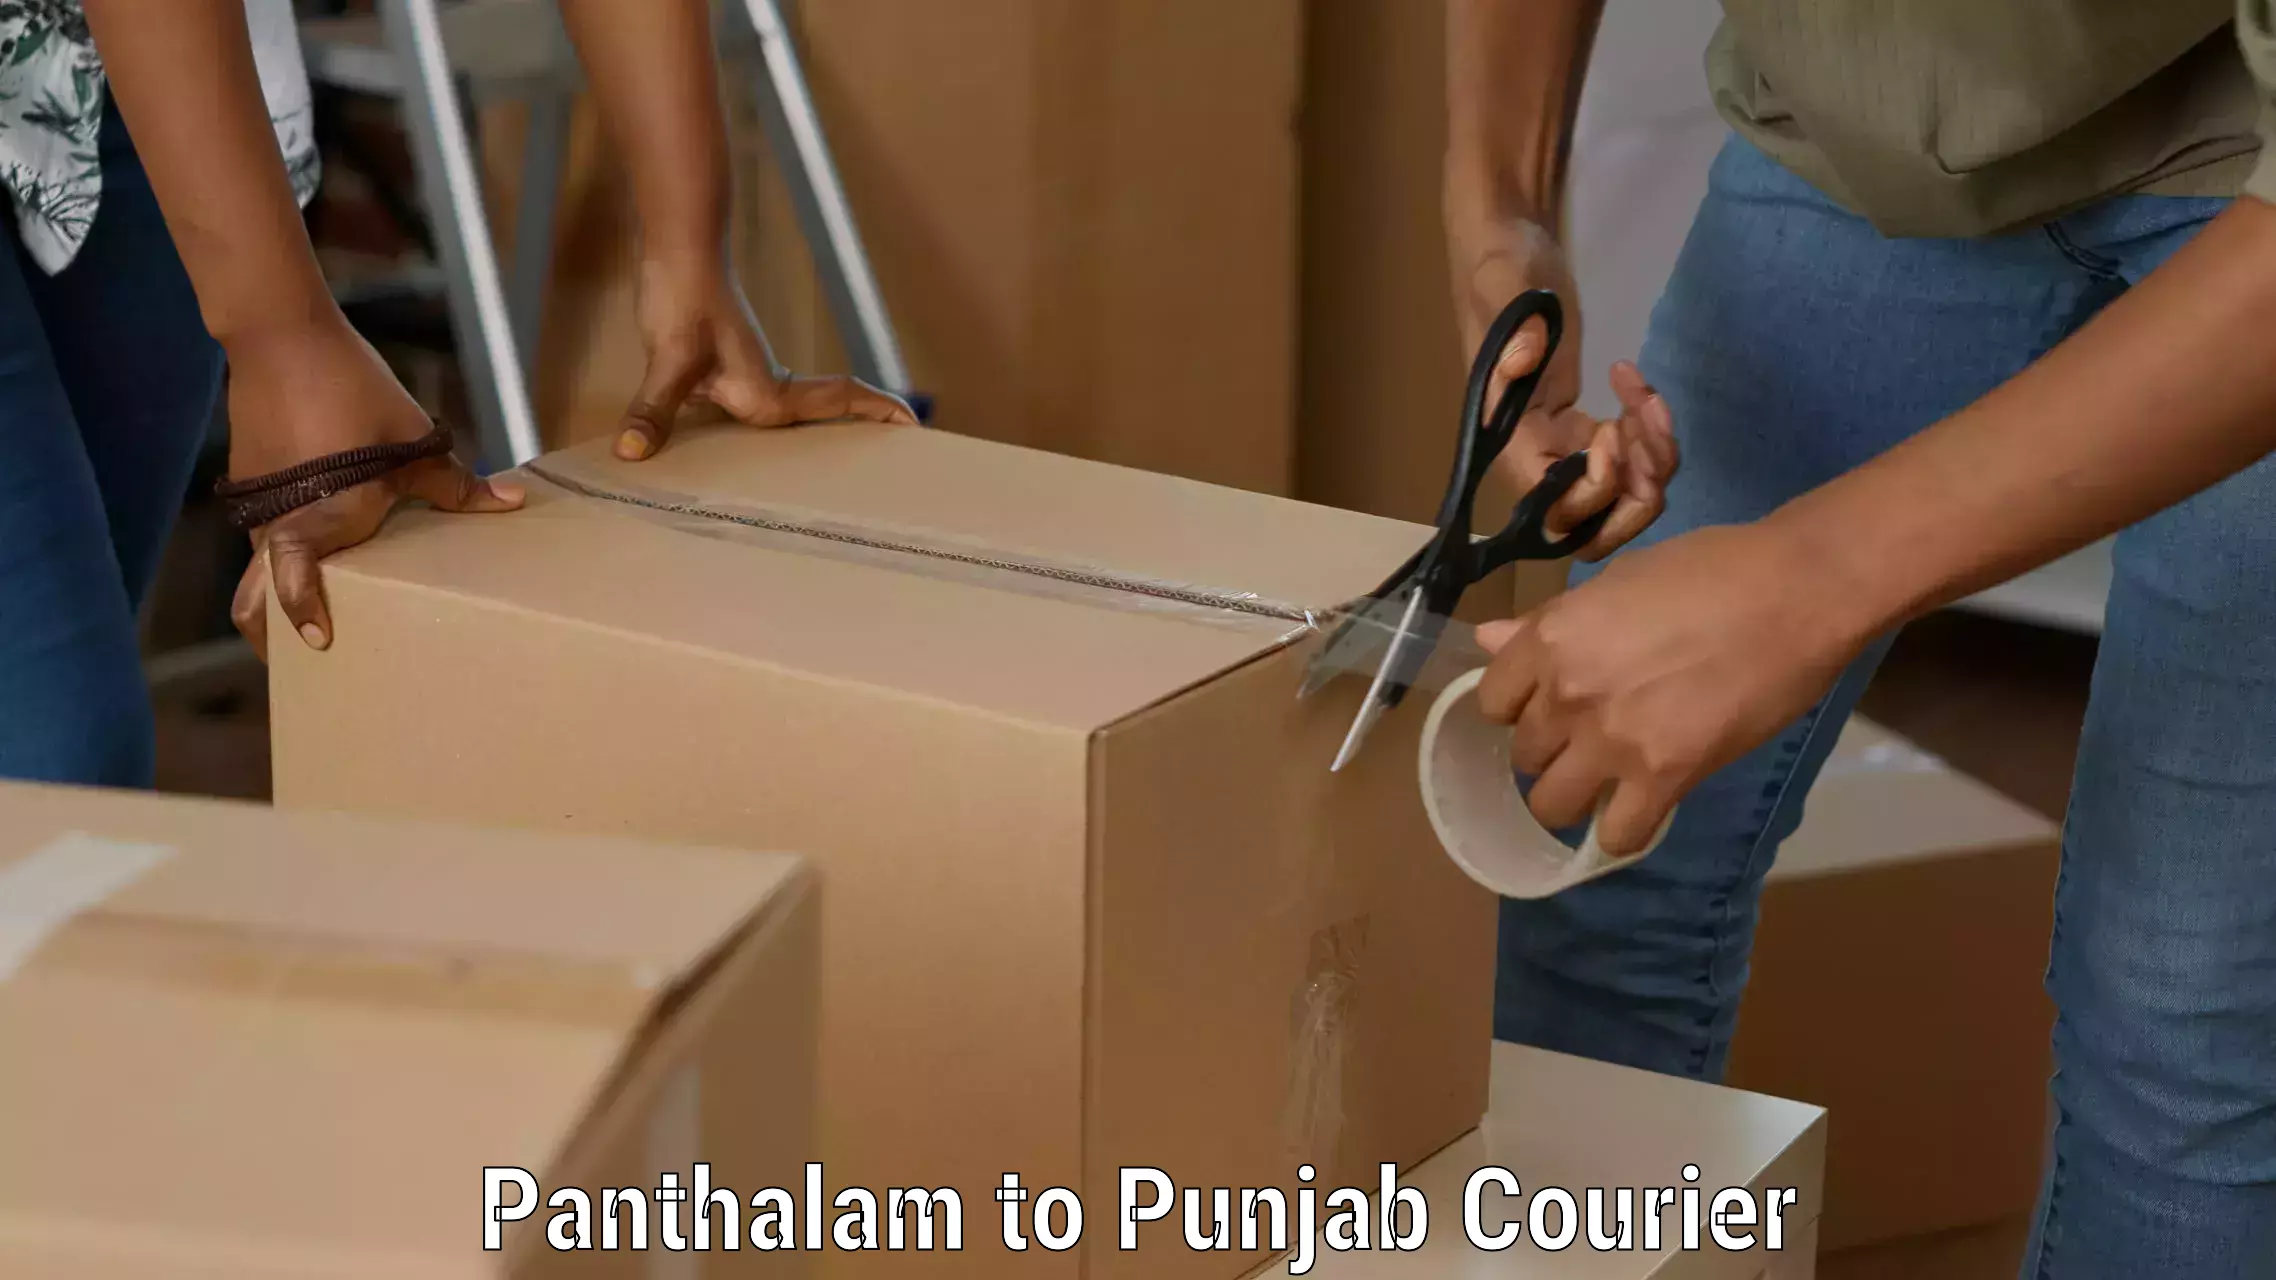 On-call courier service Panthalam to Malout